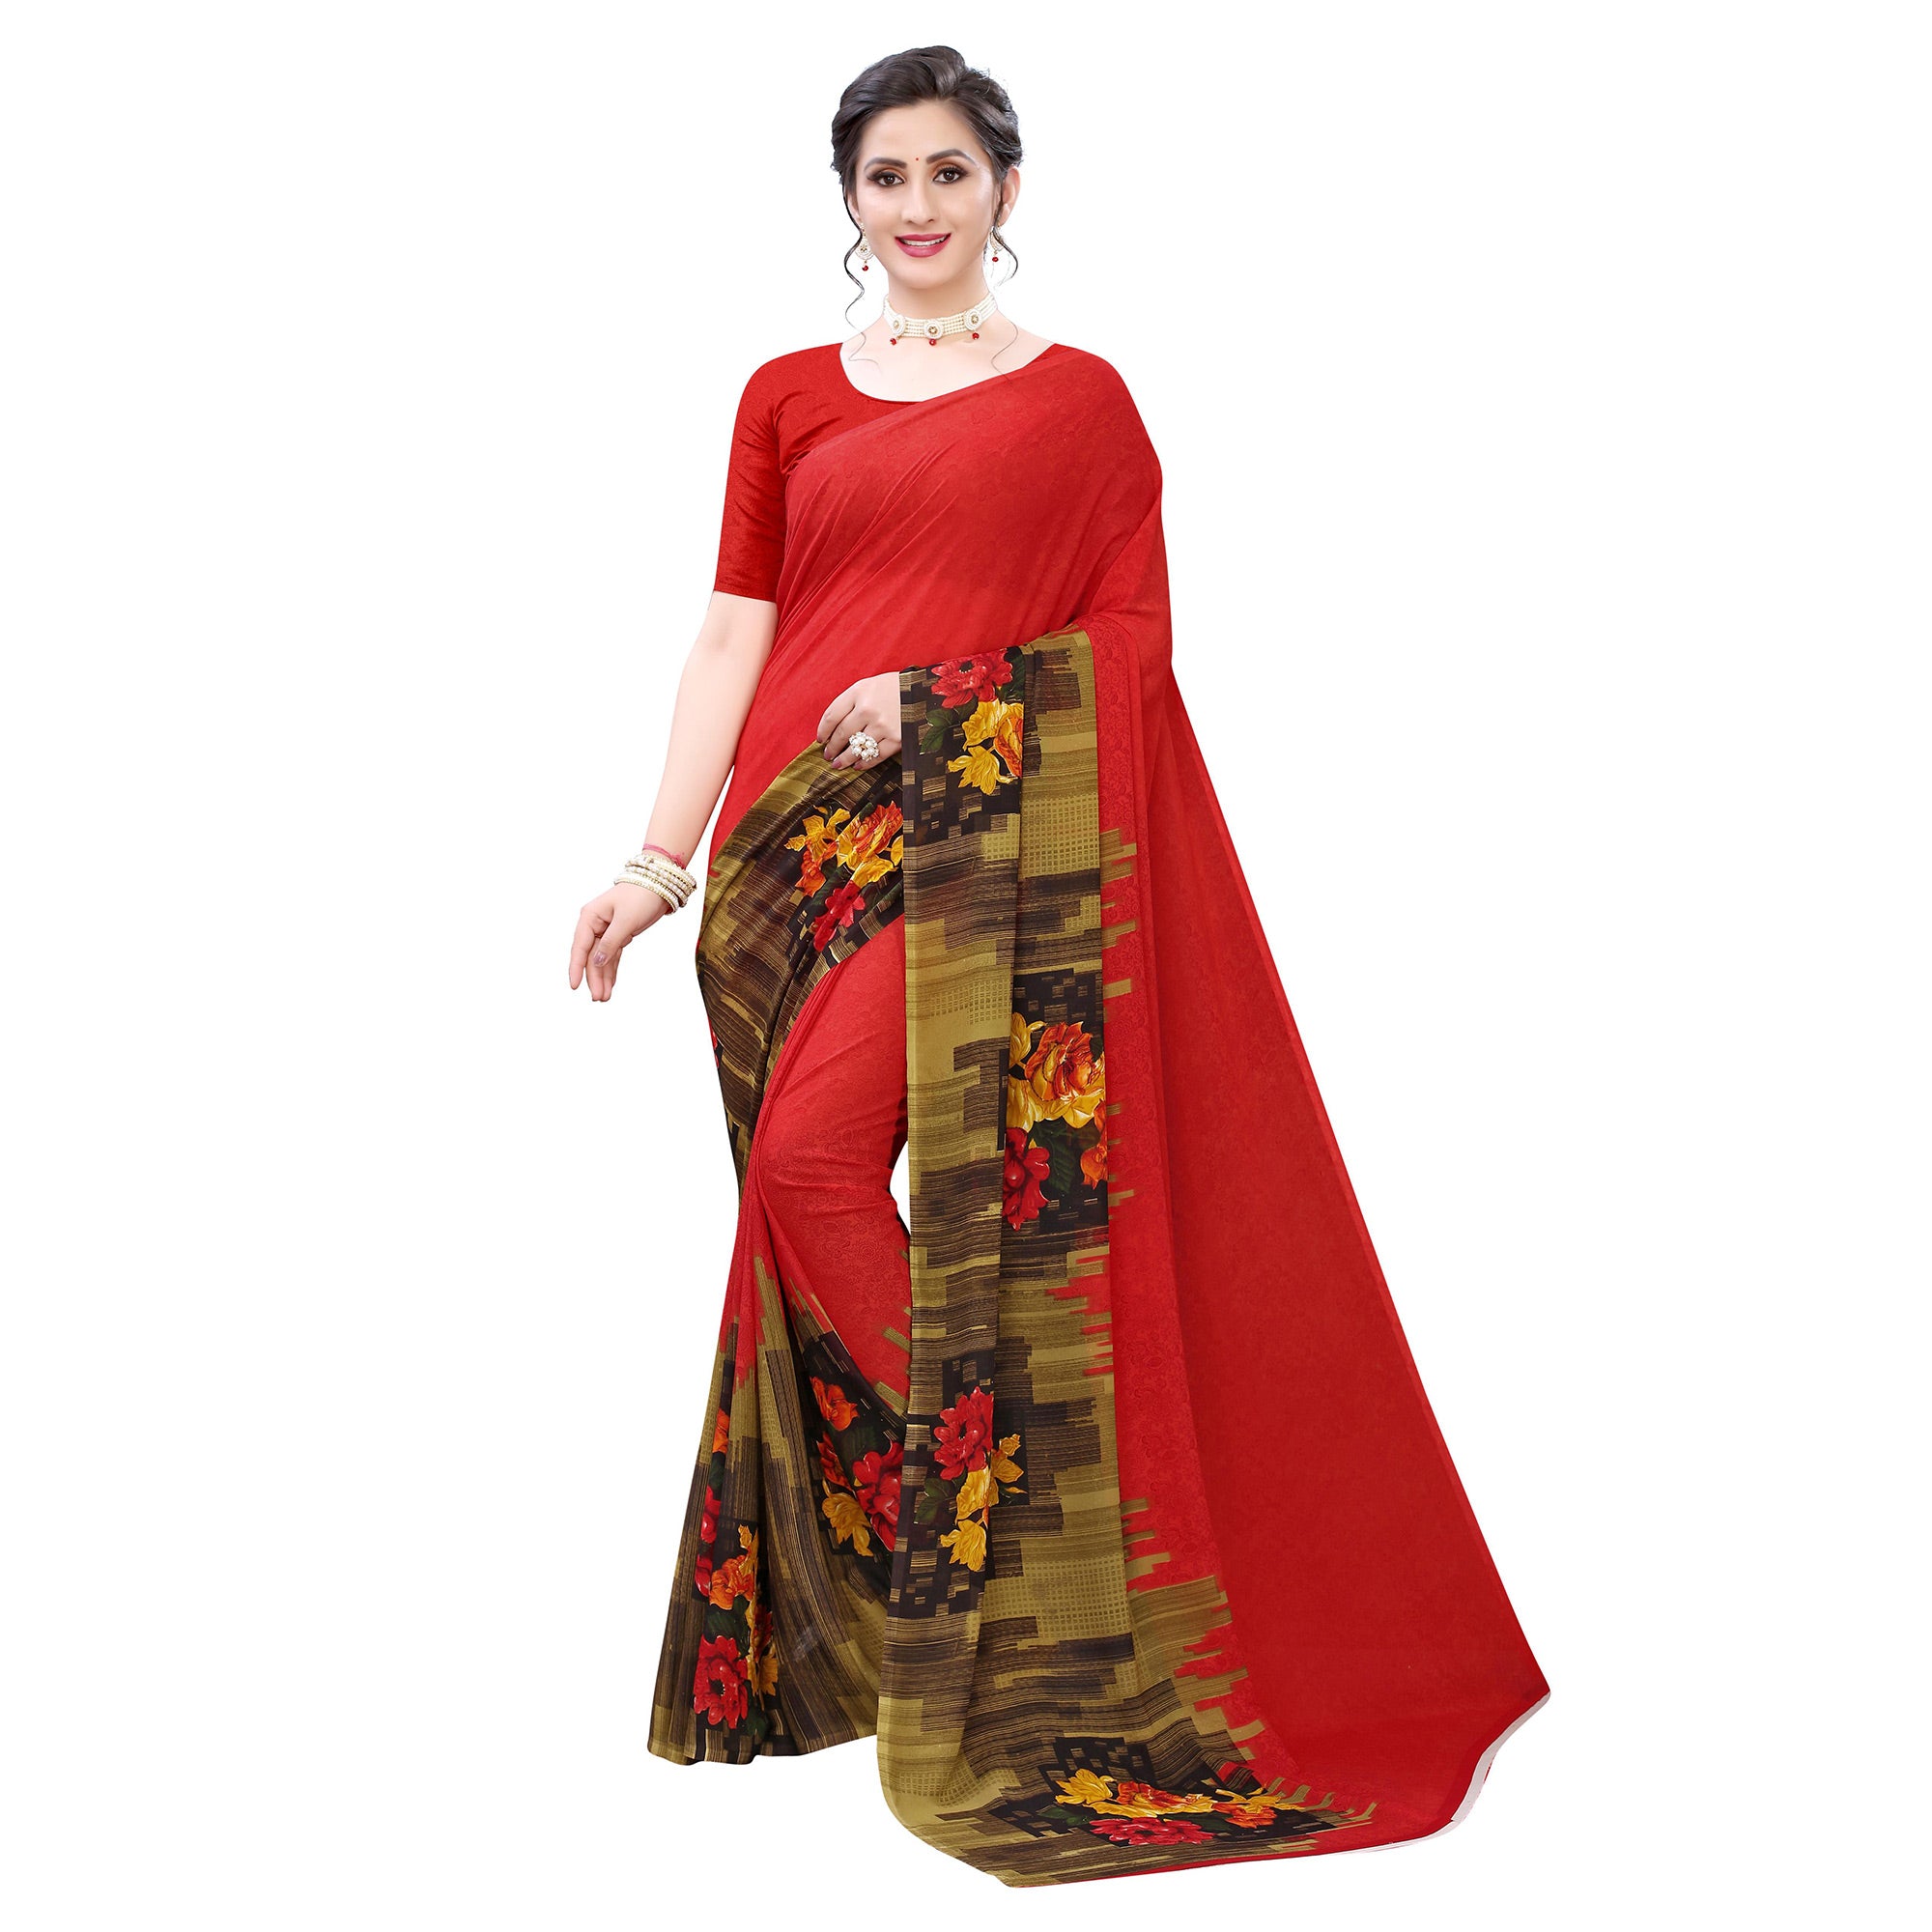 Amazing Red Colored Casual Wear Floral Printed Georgette Saree